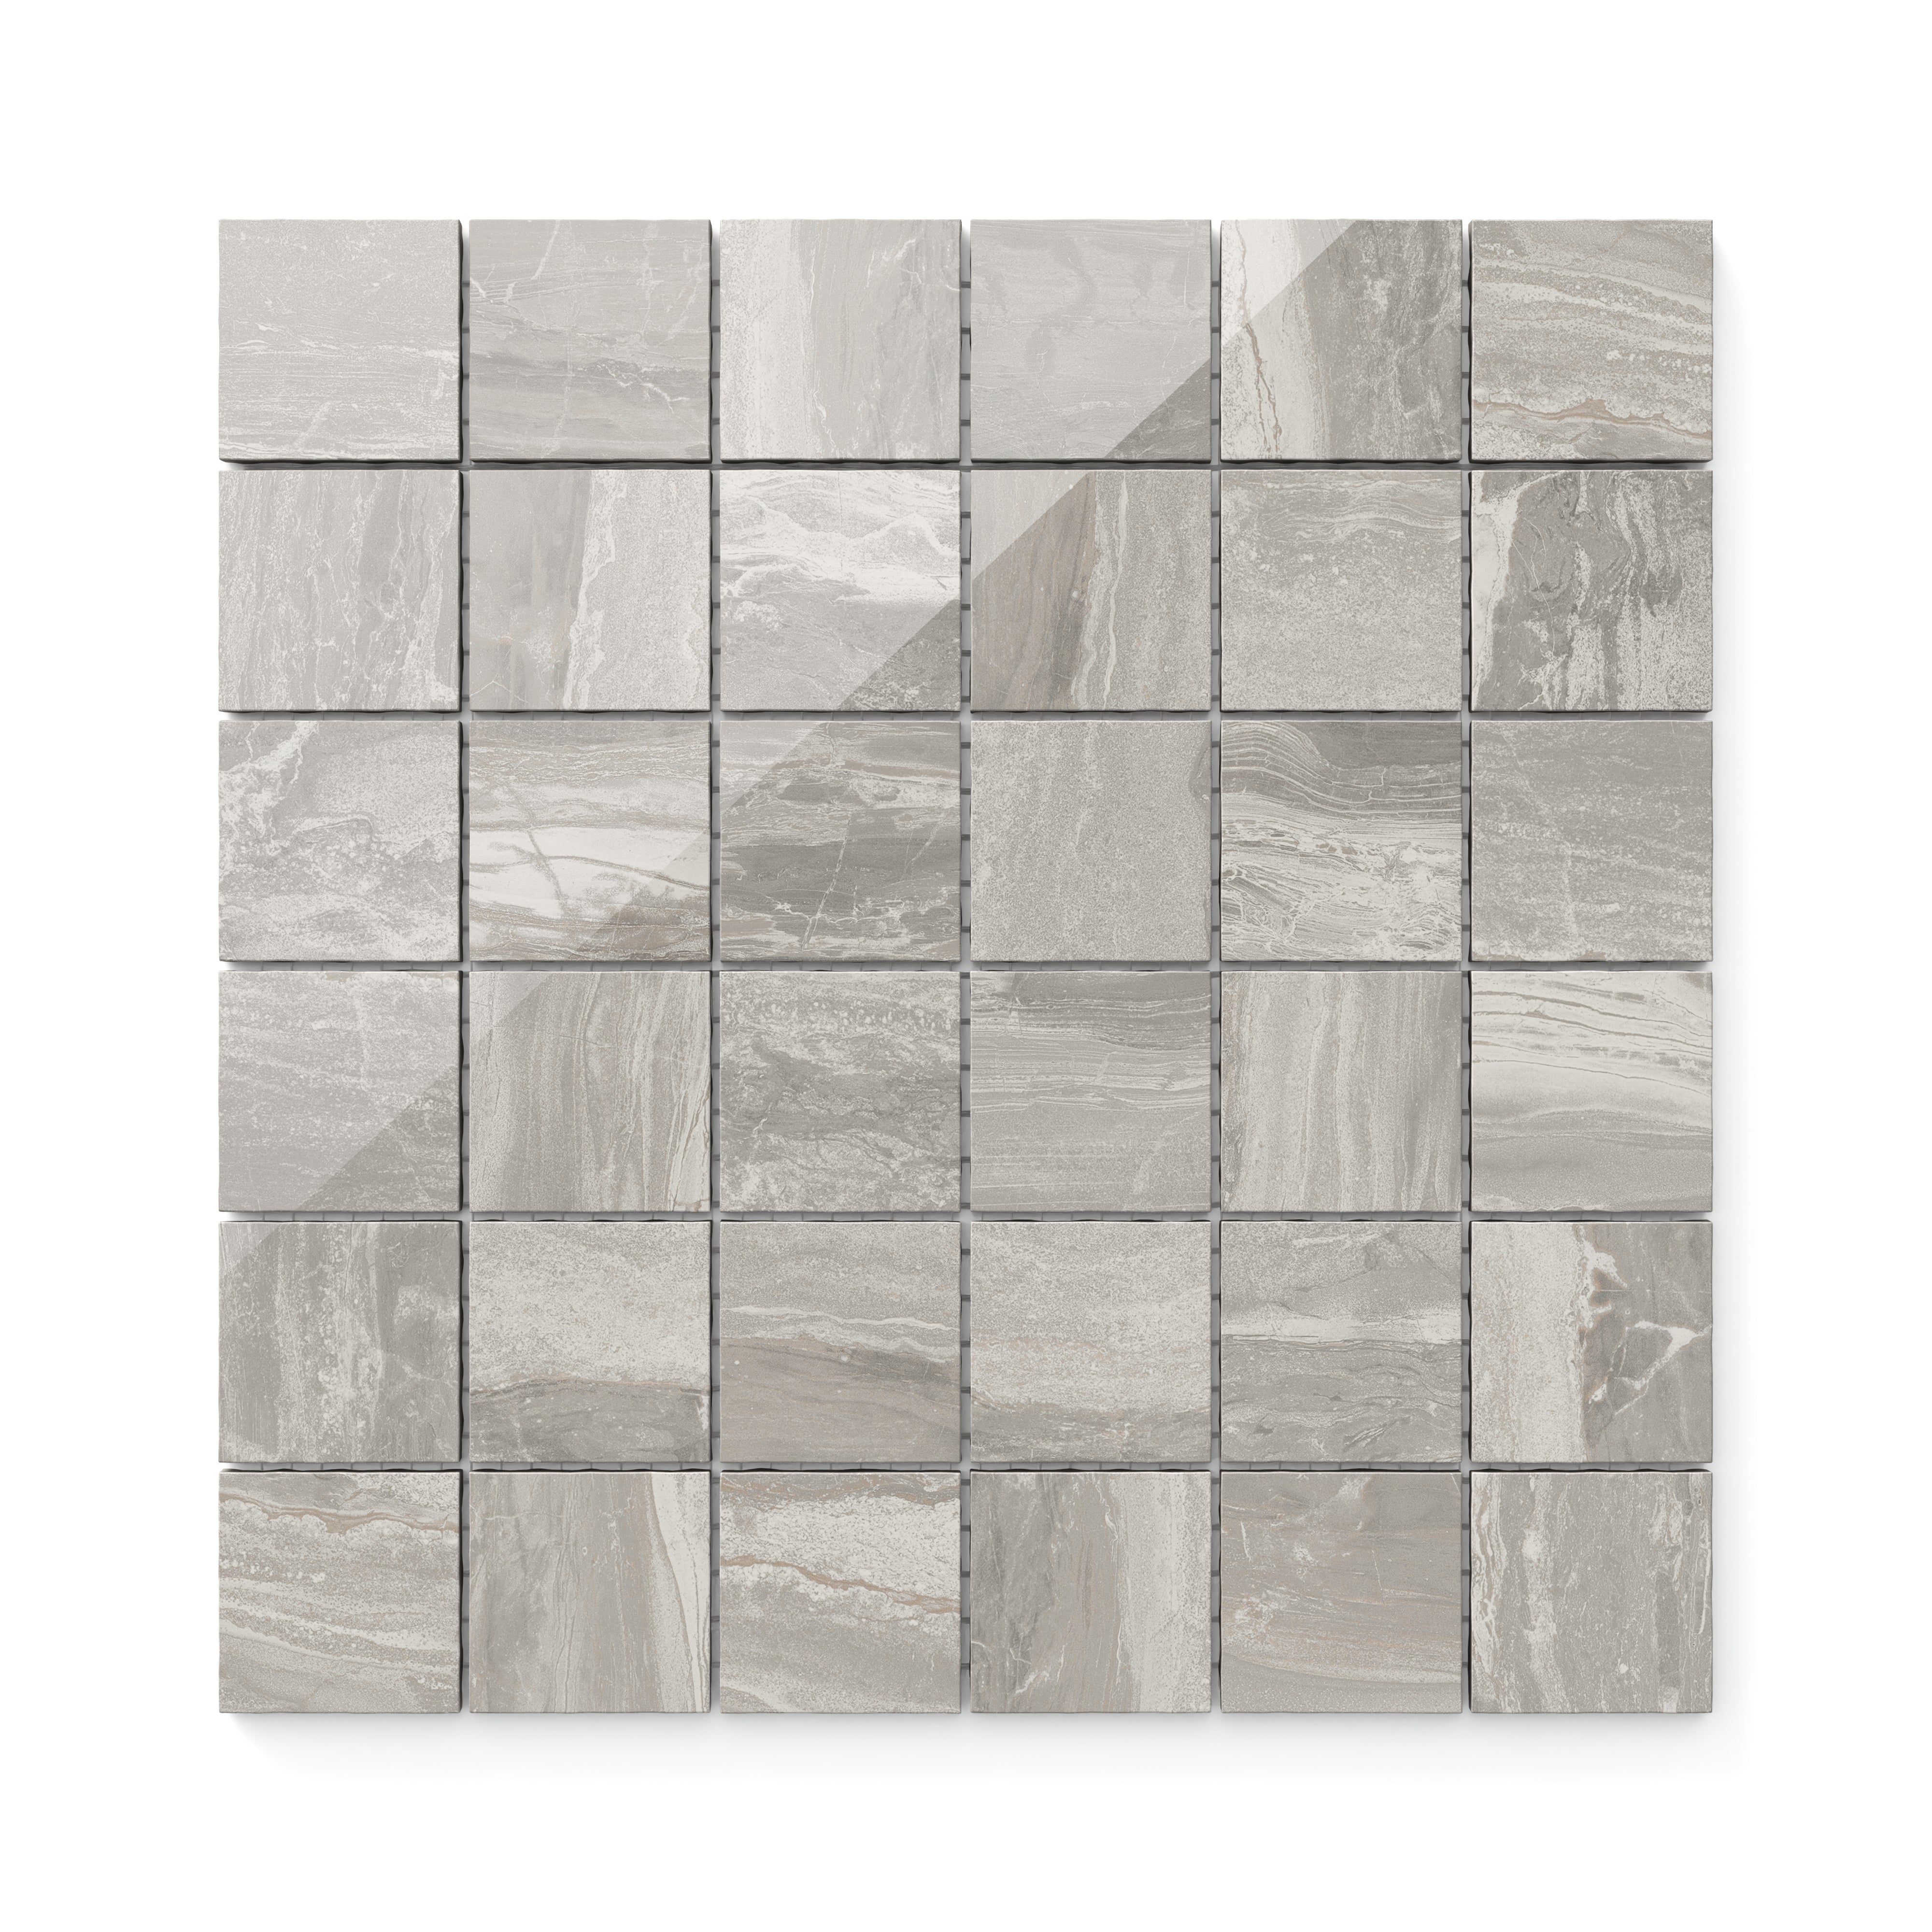 Harley 2x2 Polished Porcelain Mosaic Tile in Taupe